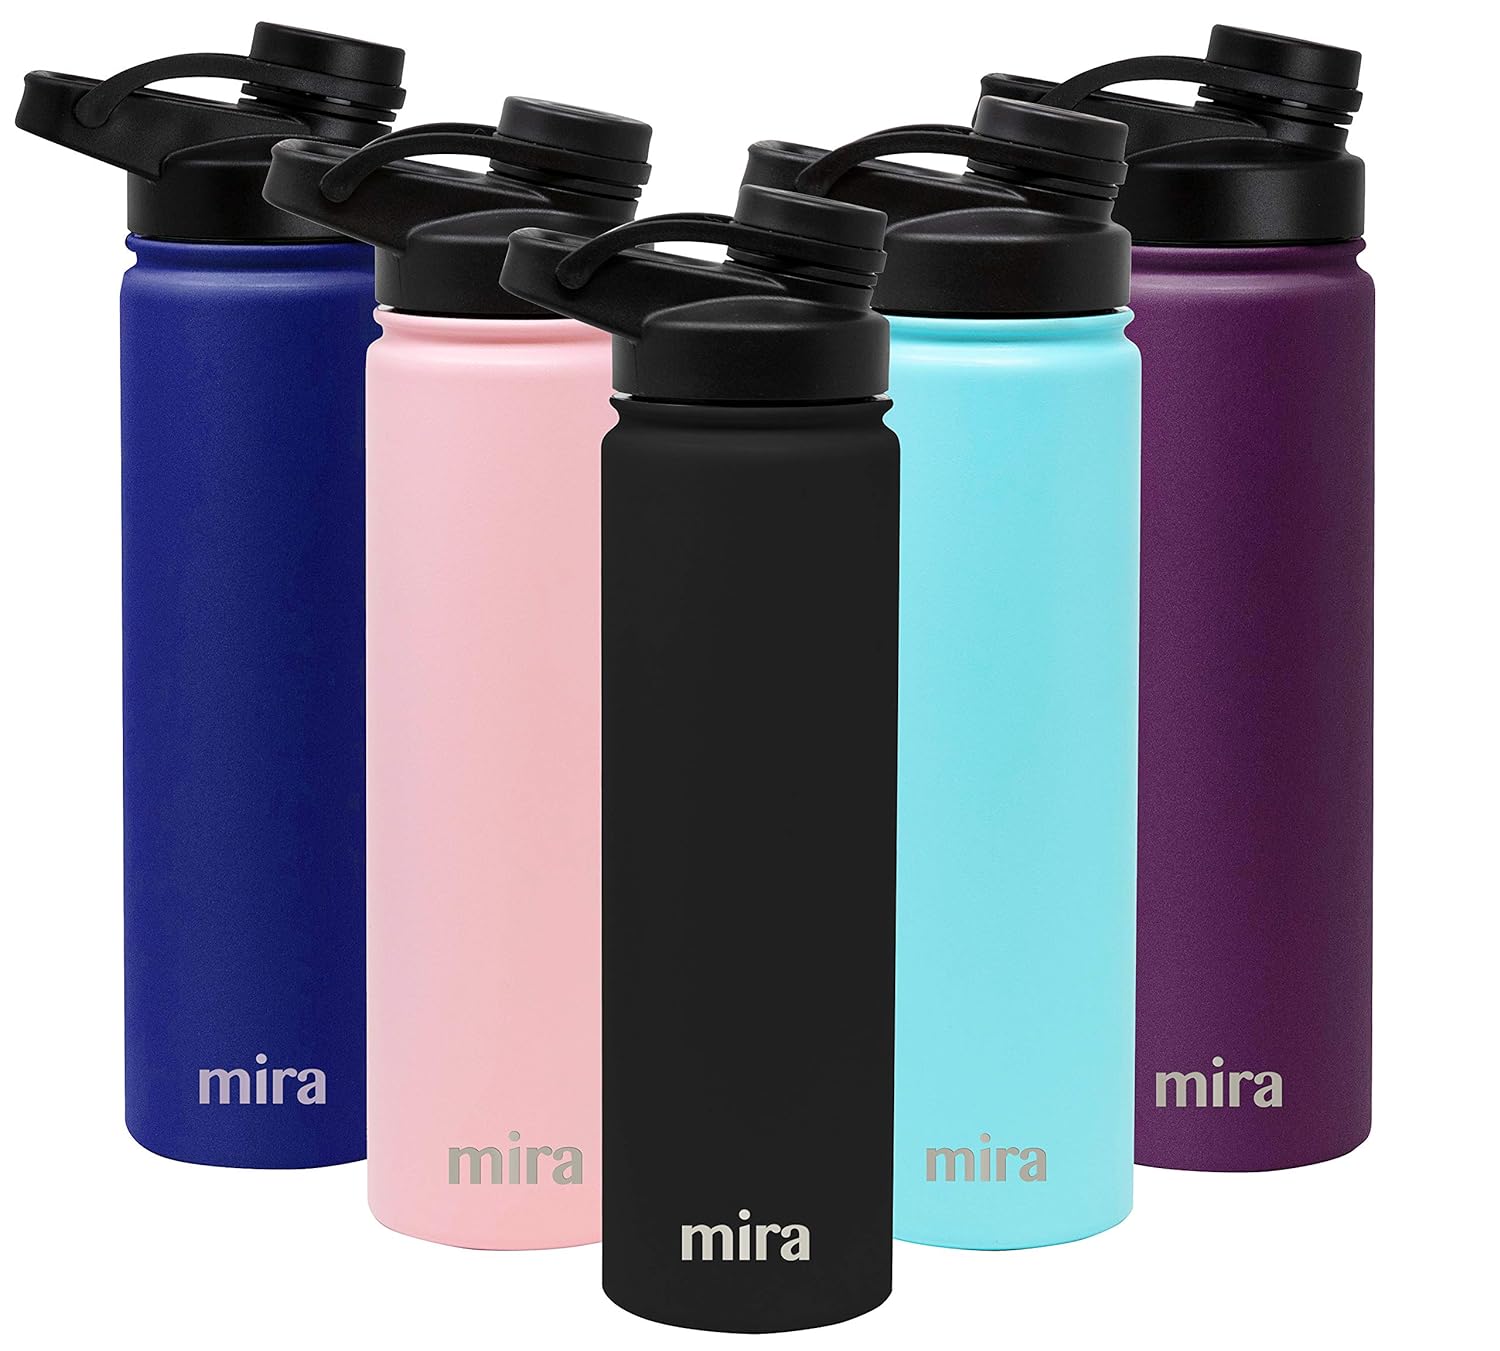 MIRA Stainless Steel Insulated Sports Water Bottle | Metal Thermos Flask Keeps Cold for 24 Hours, Hot for 12 Hours | BPA-Free Spout Lid Cap (24 oz (710 ml, 0.75 qt), Black)